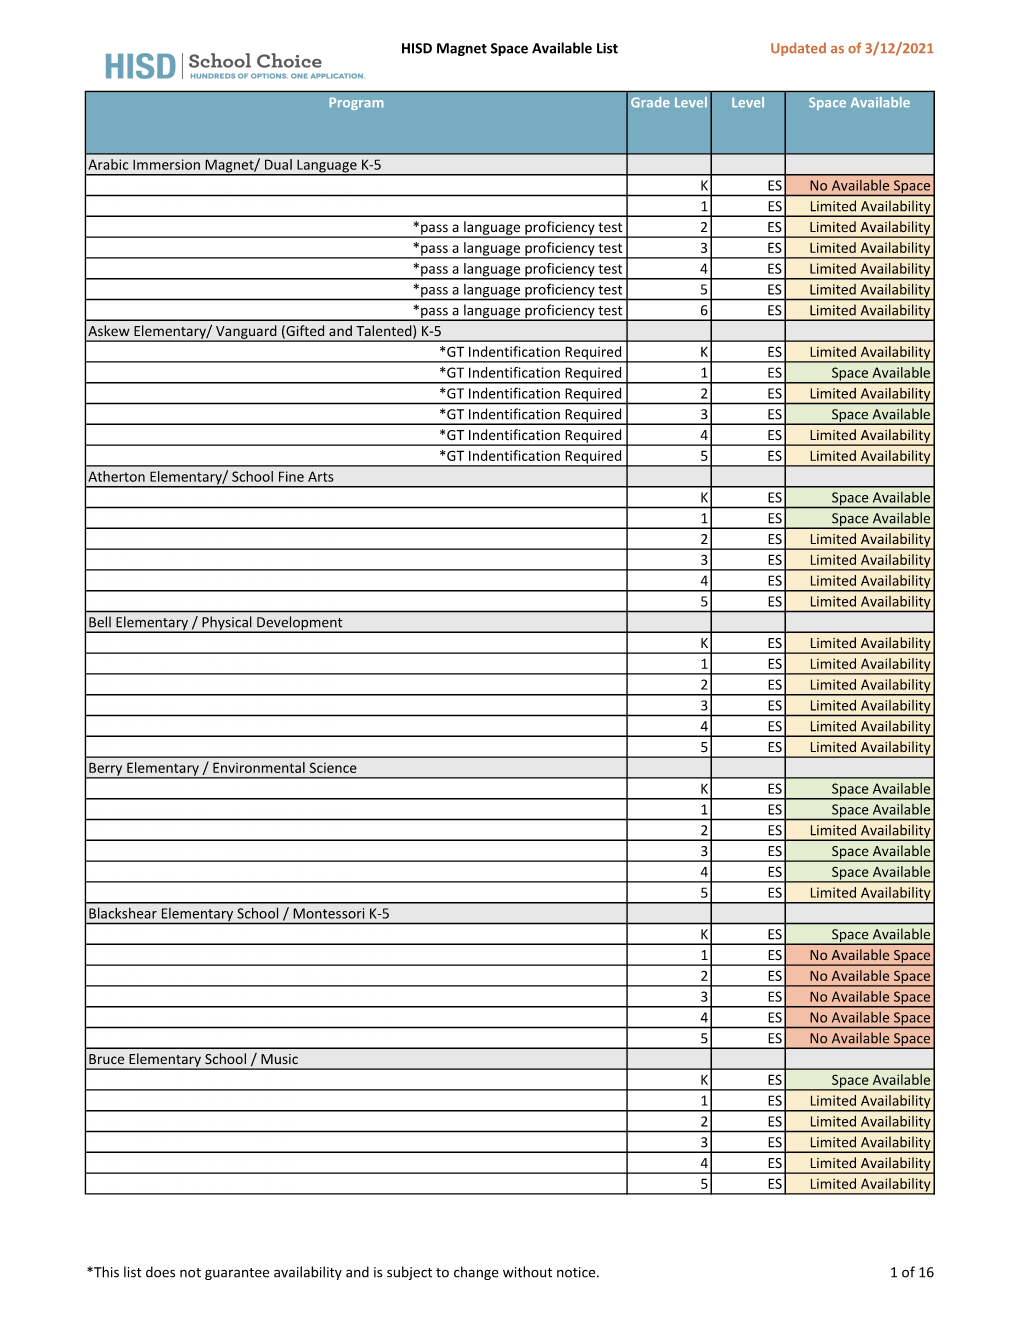 HISD Magnet Space Available List Updated As of 3/12/2021